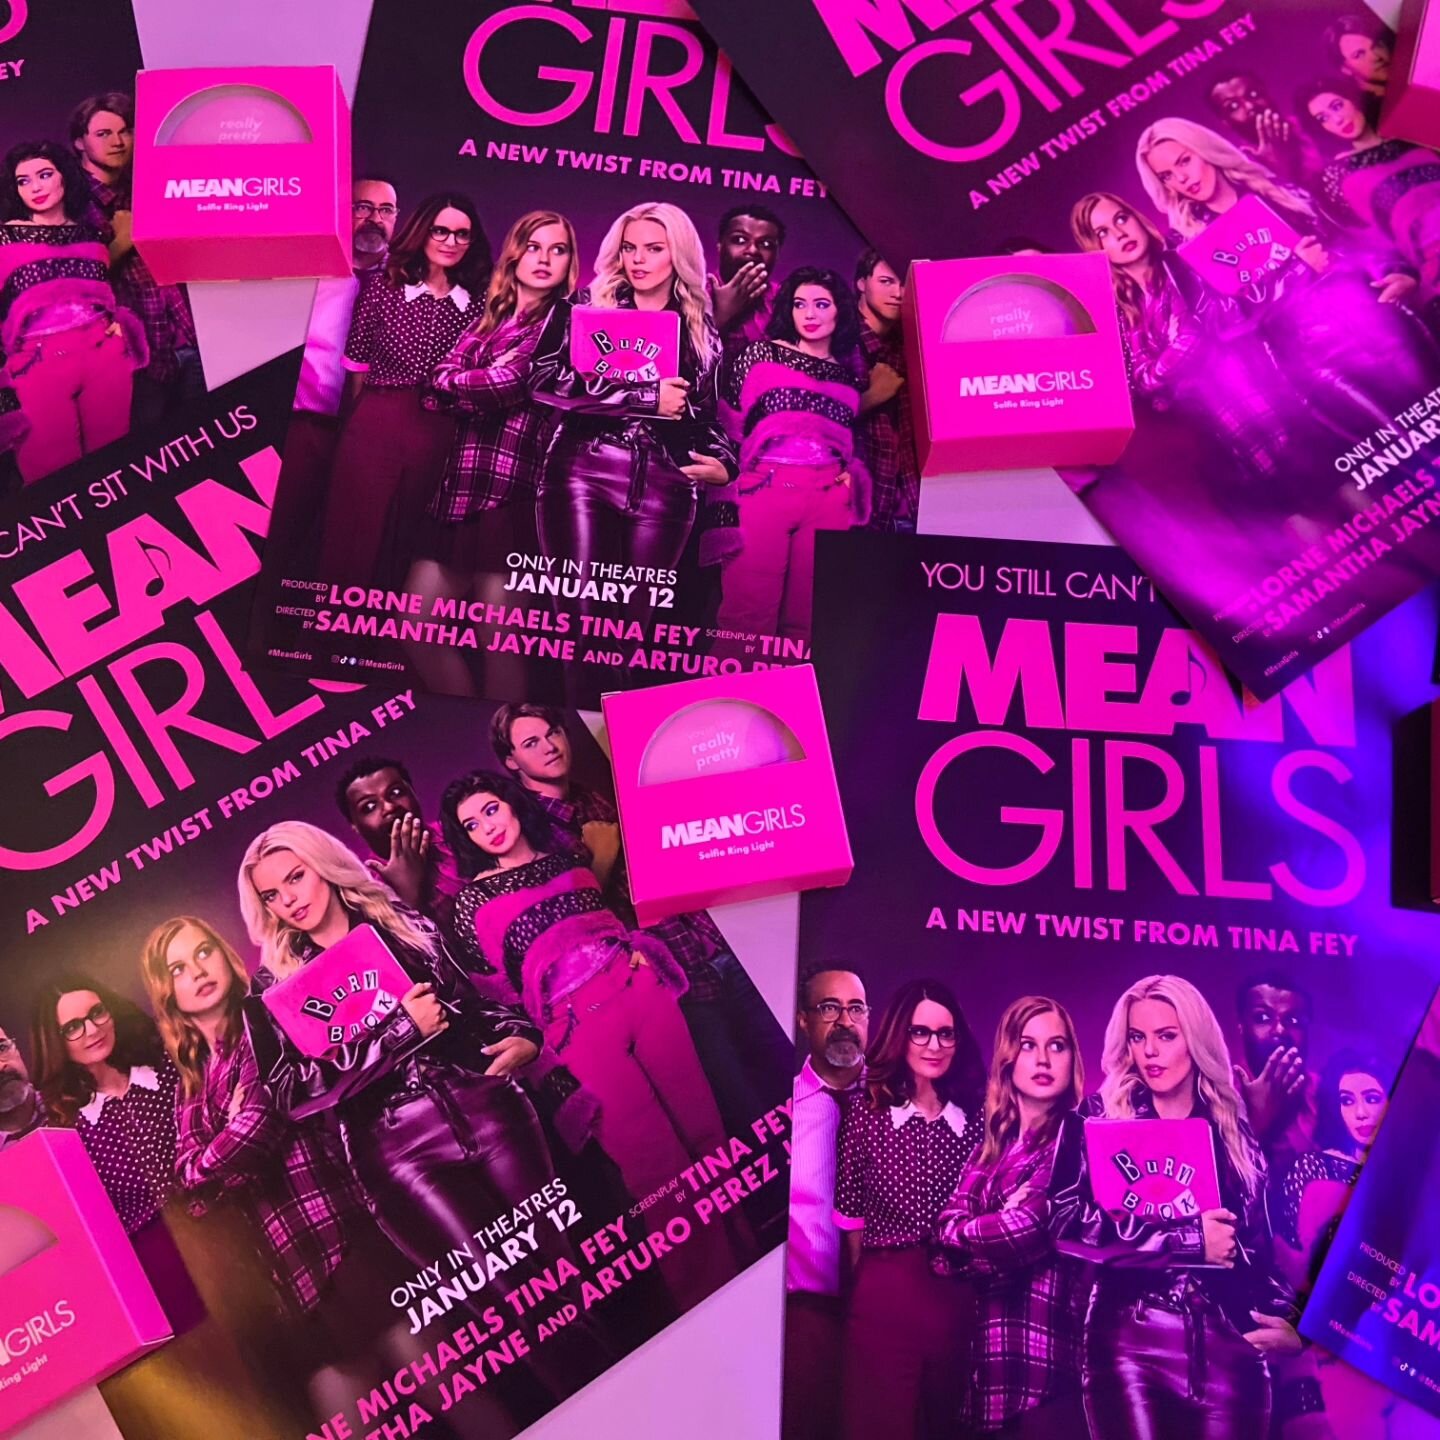 ‼️FREE BURN BOOK GIVEAWAY‼️

👚Hayyyyy Houston Plastics The @meangirls Movie is finally out in Theatres TODAY! Did you get a chance to watch yet?!

💖 Don't forget to swing by our limited time official collab Cafe pop-up with #meangirls and snag some